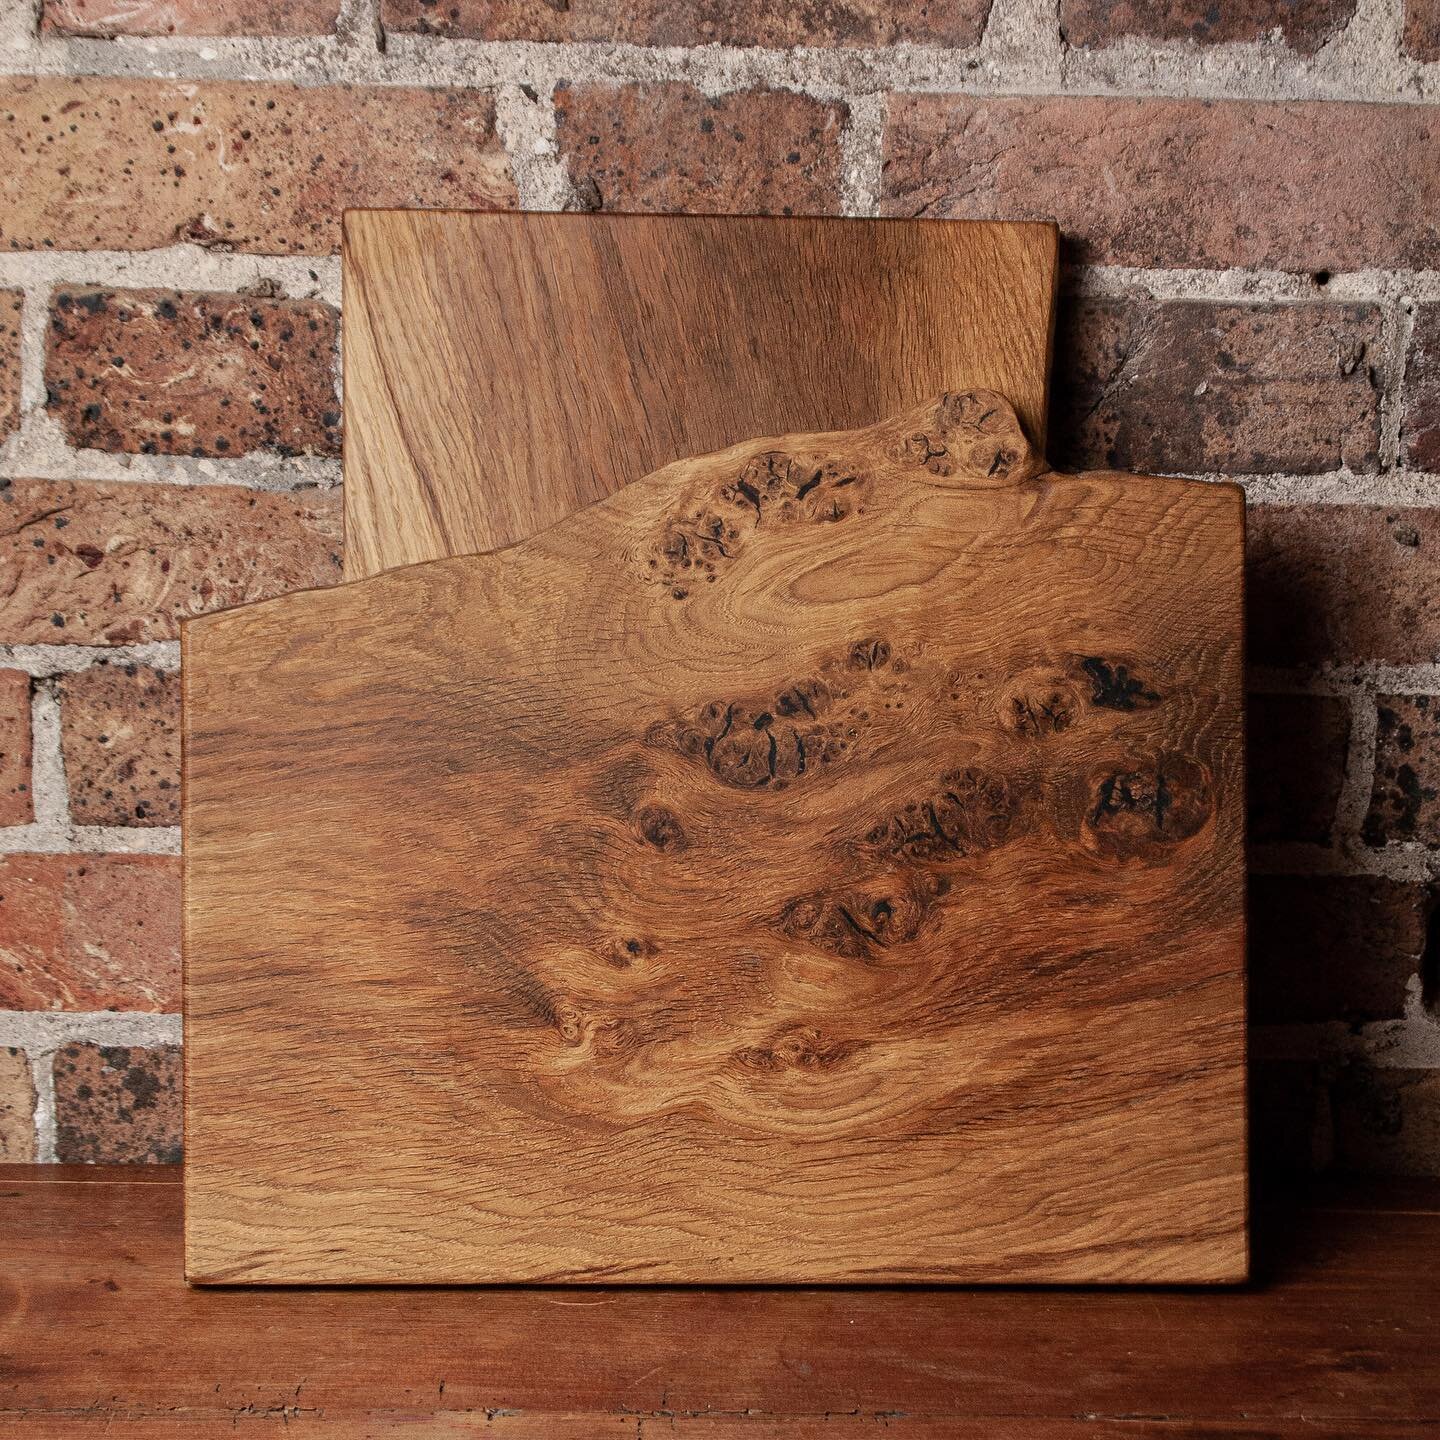 We have a small batch of very unique, fairly large oak chopping or serving boards in stock currently. Give us a message if you&rsquo;re interested 🌳